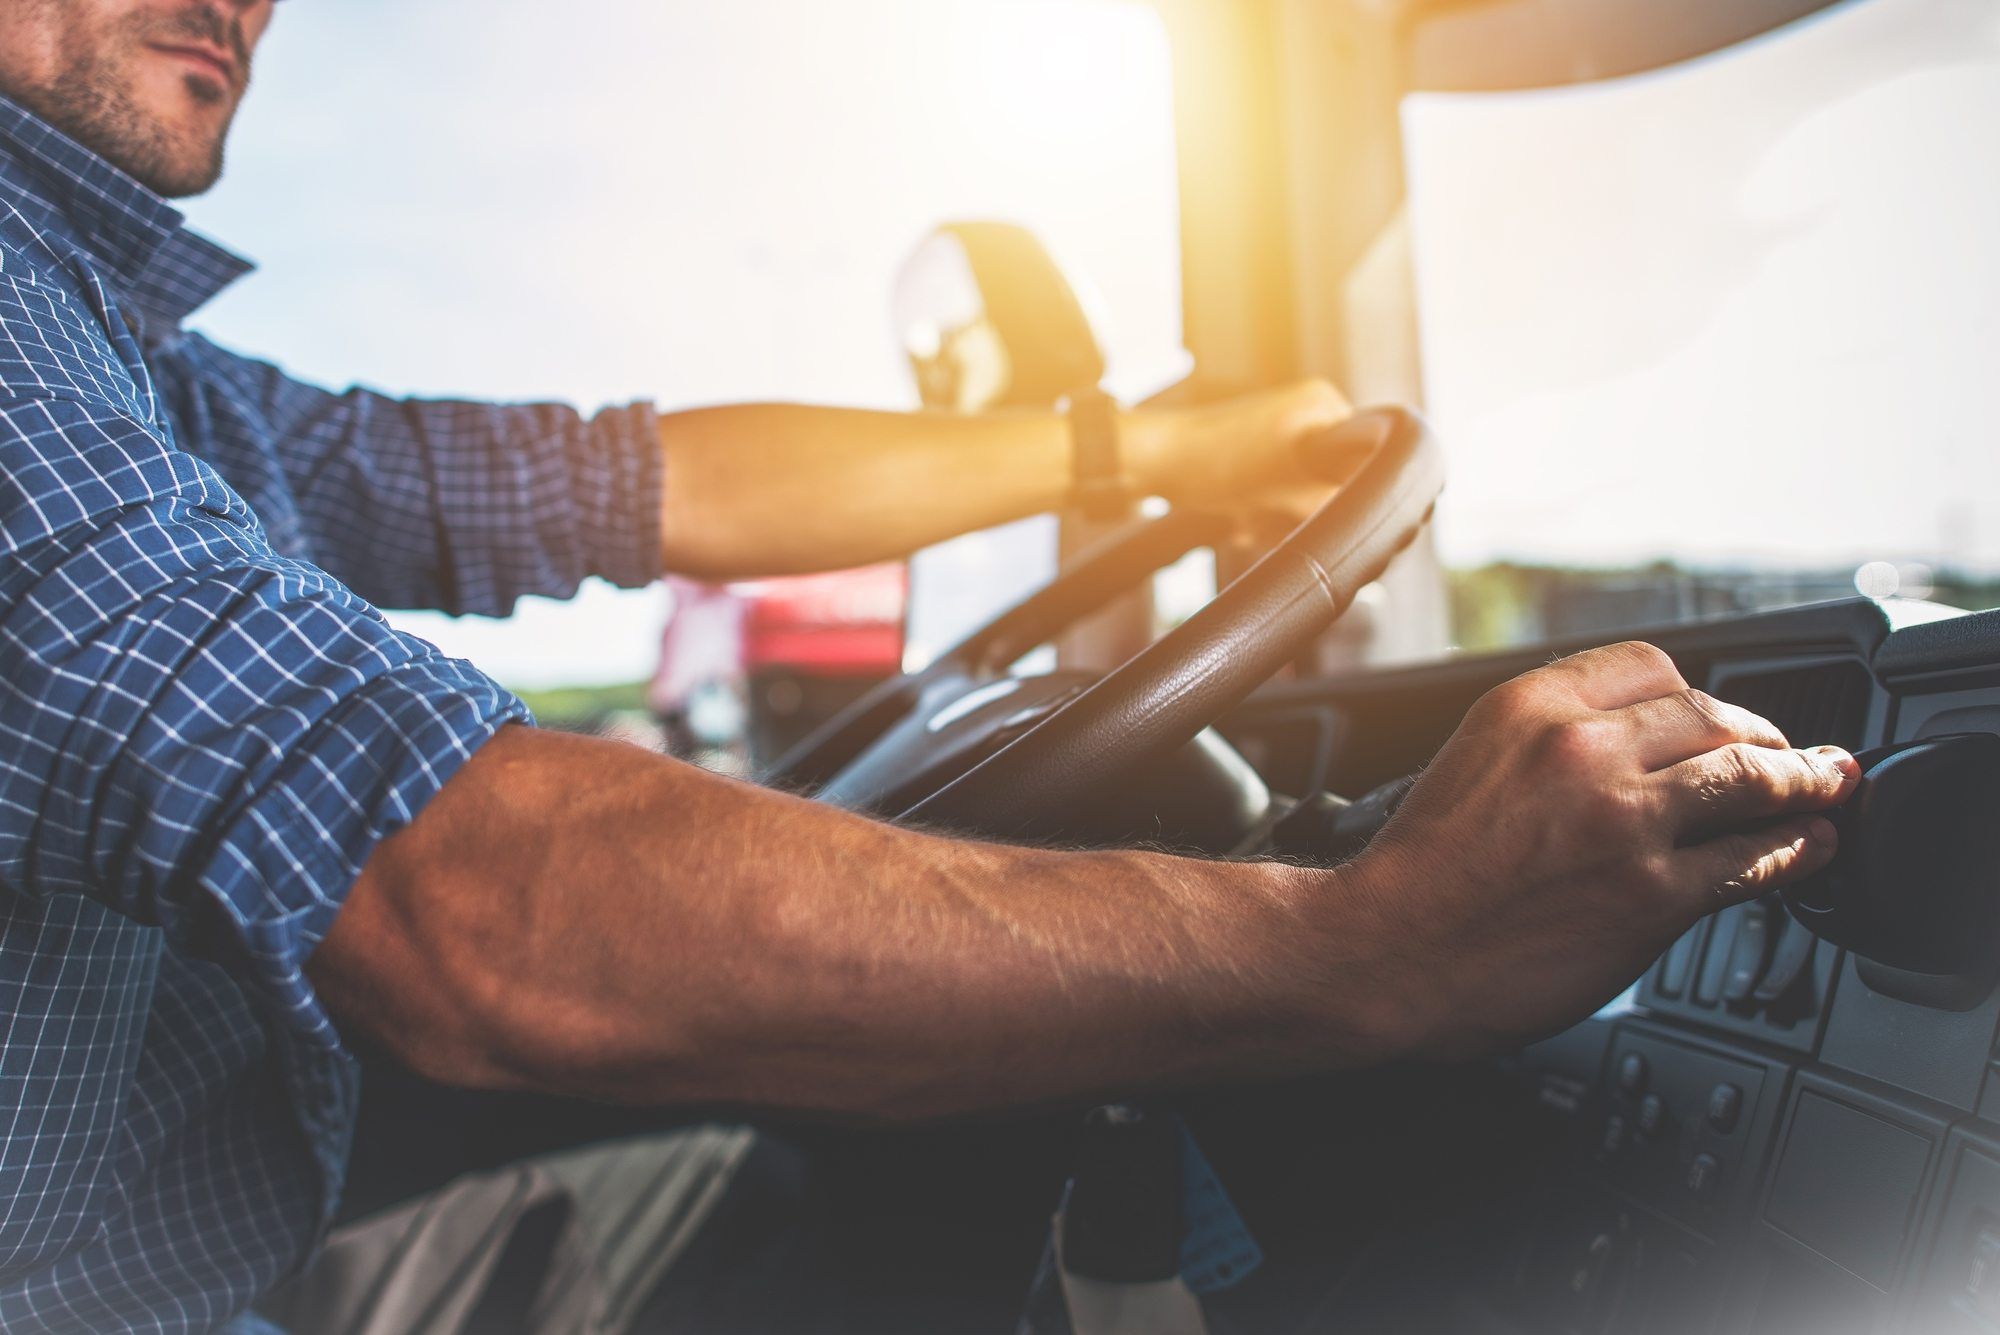 What are independent trucker drivers?